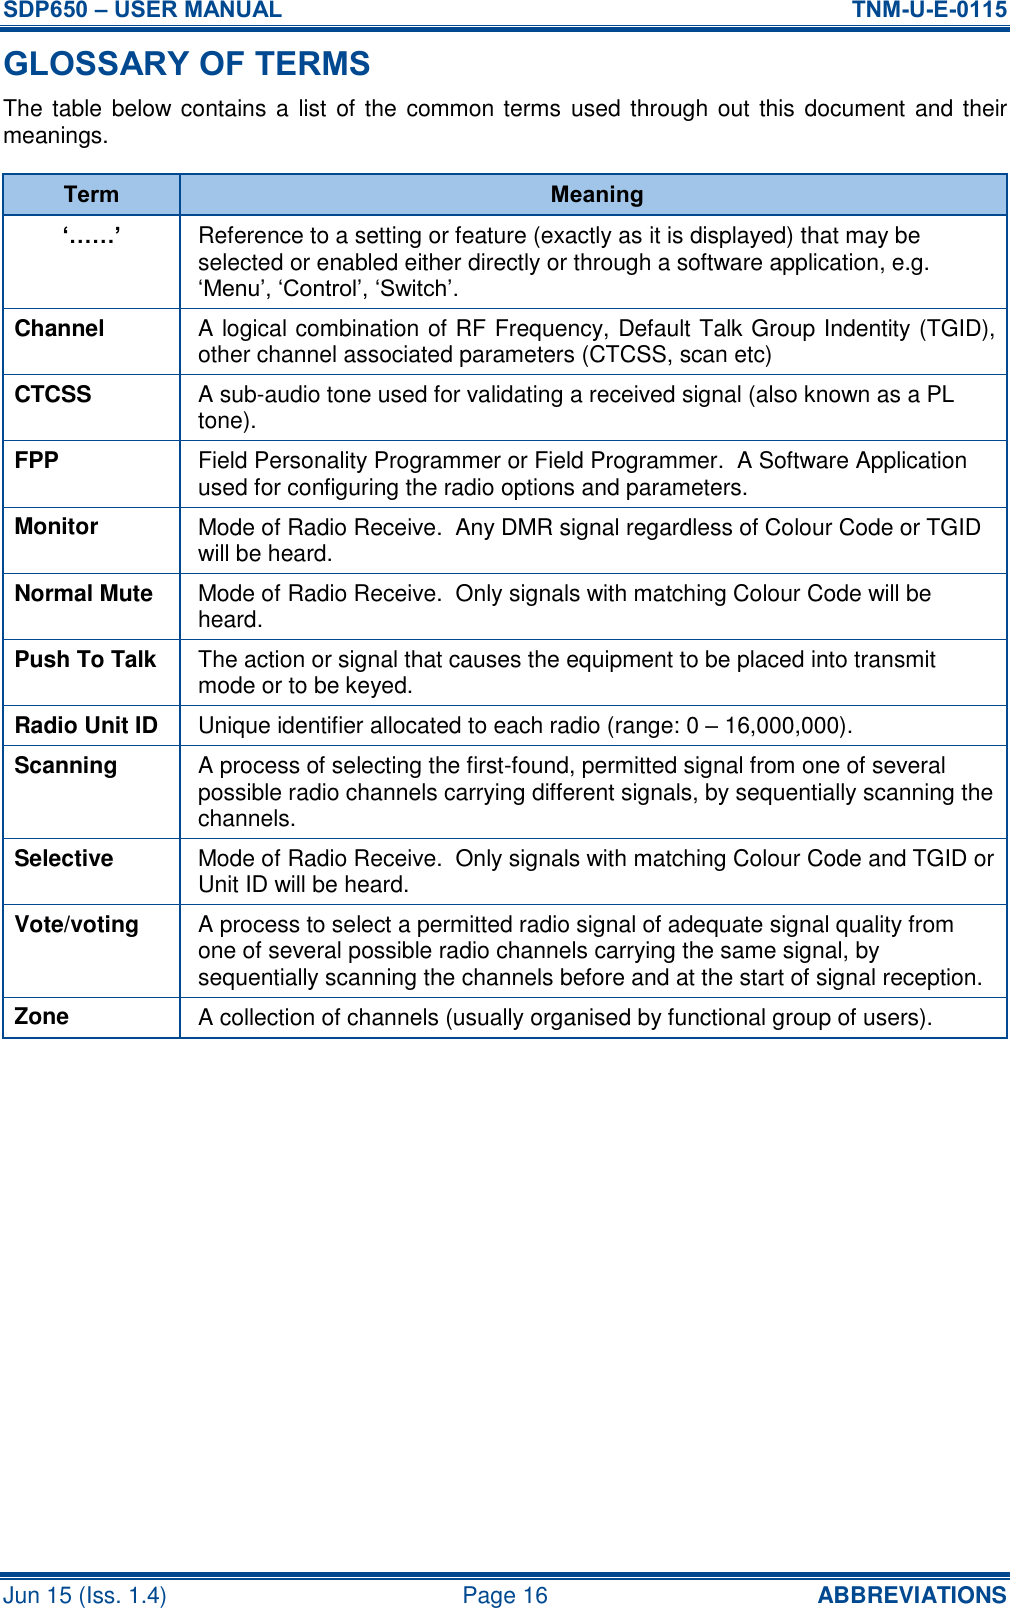 SDP650 – USER MANUAL  TNM-U-E-0115 Jun 15 (Iss. 1.4)  Page 16 ABBREVIATIONS GLOSSARY OF TERMS The table below contains a  list of the common terms  used through out this document and their meanings. Term Meaning ‘……’ Reference to a setting or feature (exactly as it is displayed) that may be selected or enabled either directly or through a software application, e.g. ‘Menu’, ‘Control’, ‘Switch’. Channel A logical combination of RF Frequency, Default Talk Group Indentity (TGID), other channel associated parameters (CTCSS, scan etc) CTCSS A sub-audio tone used for validating a received signal (also known as a PL tone). FPP Field Personality Programmer or Field Programmer.  A Software Application used for configuring the radio options and parameters. Monitor Mode of Radio Receive.  Any DMR signal regardless of Colour Code or TGID will be heard. Normal Mute Mode of Radio Receive.  Only signals with matching Colour Code will be heard. Push To Talk The action or signal that causes the equipment to be placed into transmit mode or to be keyed. Radio Unit ID Unique identifier allocated to each radio (range: 0 – 16,000,000). Scanning A process of selecting the first-found, permitted signal from one of several possible radio channels carrying different signals, by sequentially scanning the channels. Selective Mode of Radio Receive.  Only signals with matching Colour Code and TGID or Unit ID will be heard. Vote/voting A process to select a permitted radio signal of adequate signal quality from one of several possible radio channels carrying the same signal, by sequentially scanning the channels before and at the start of signal reception. Zone A collection of channels (usually organised by functional group of users).     